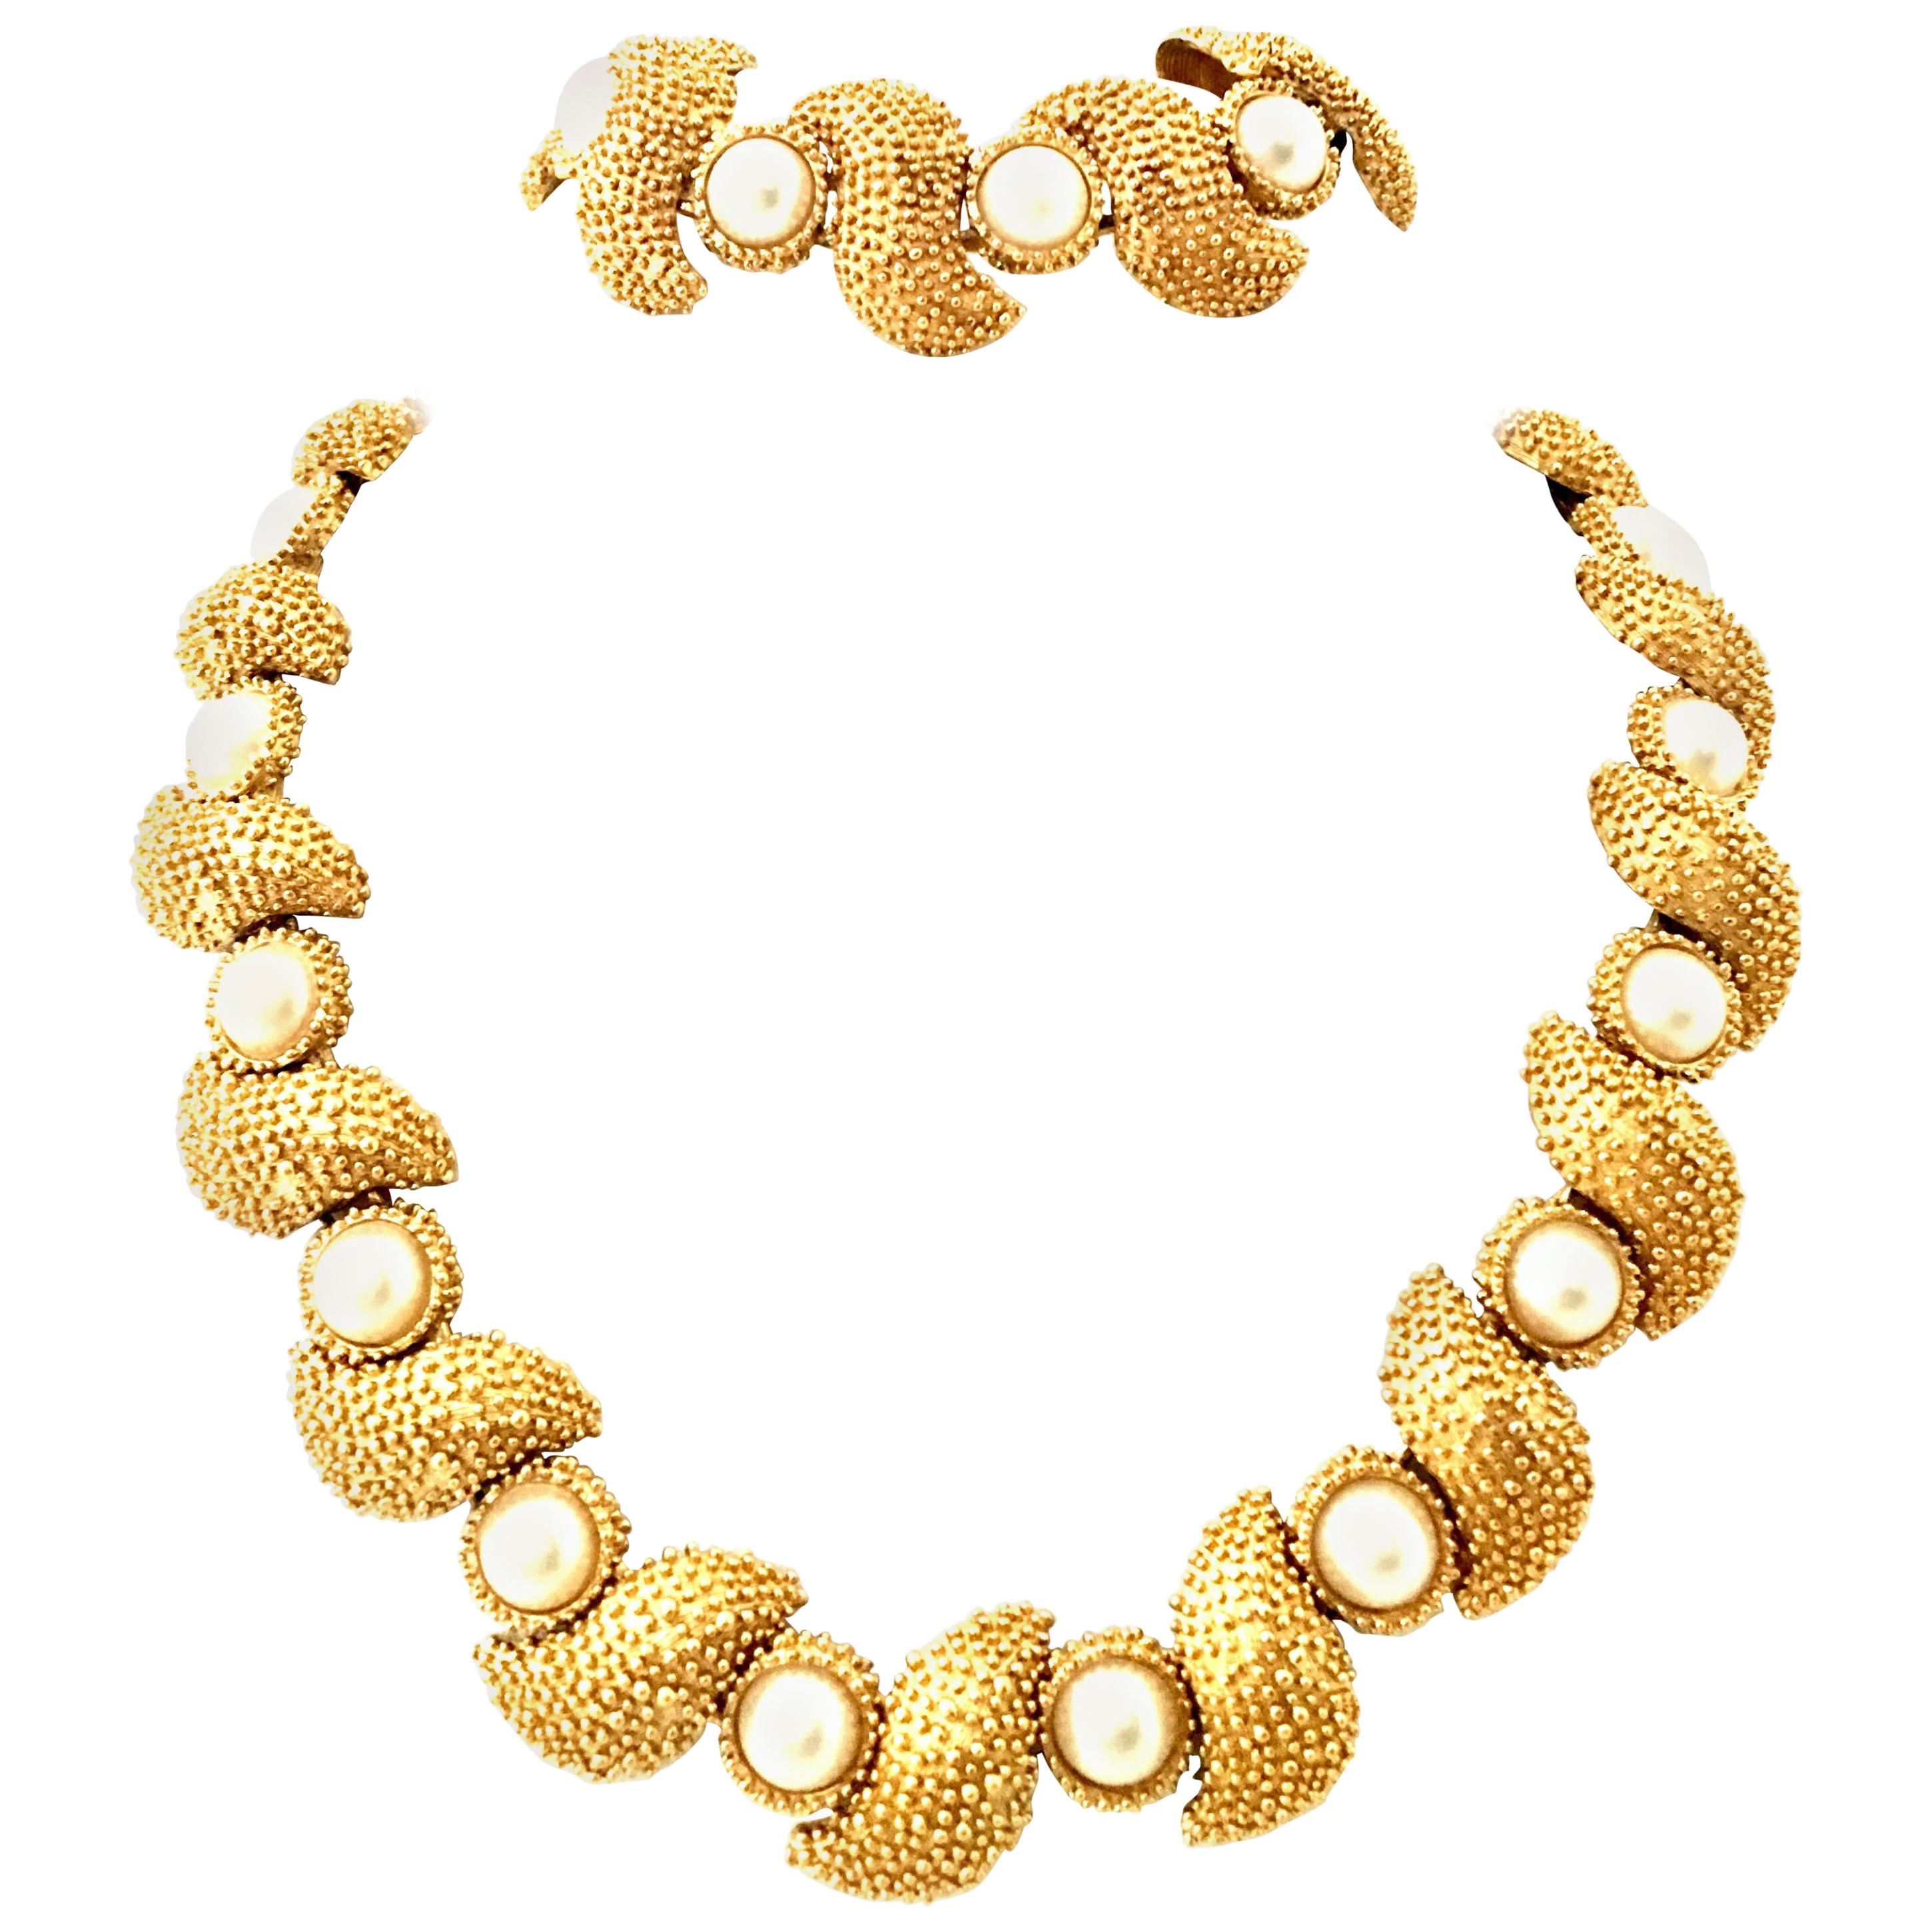 20th Century Gold Plate & Faux Pearl Necklace And Bracelet By, Trifari S/2 For Sale